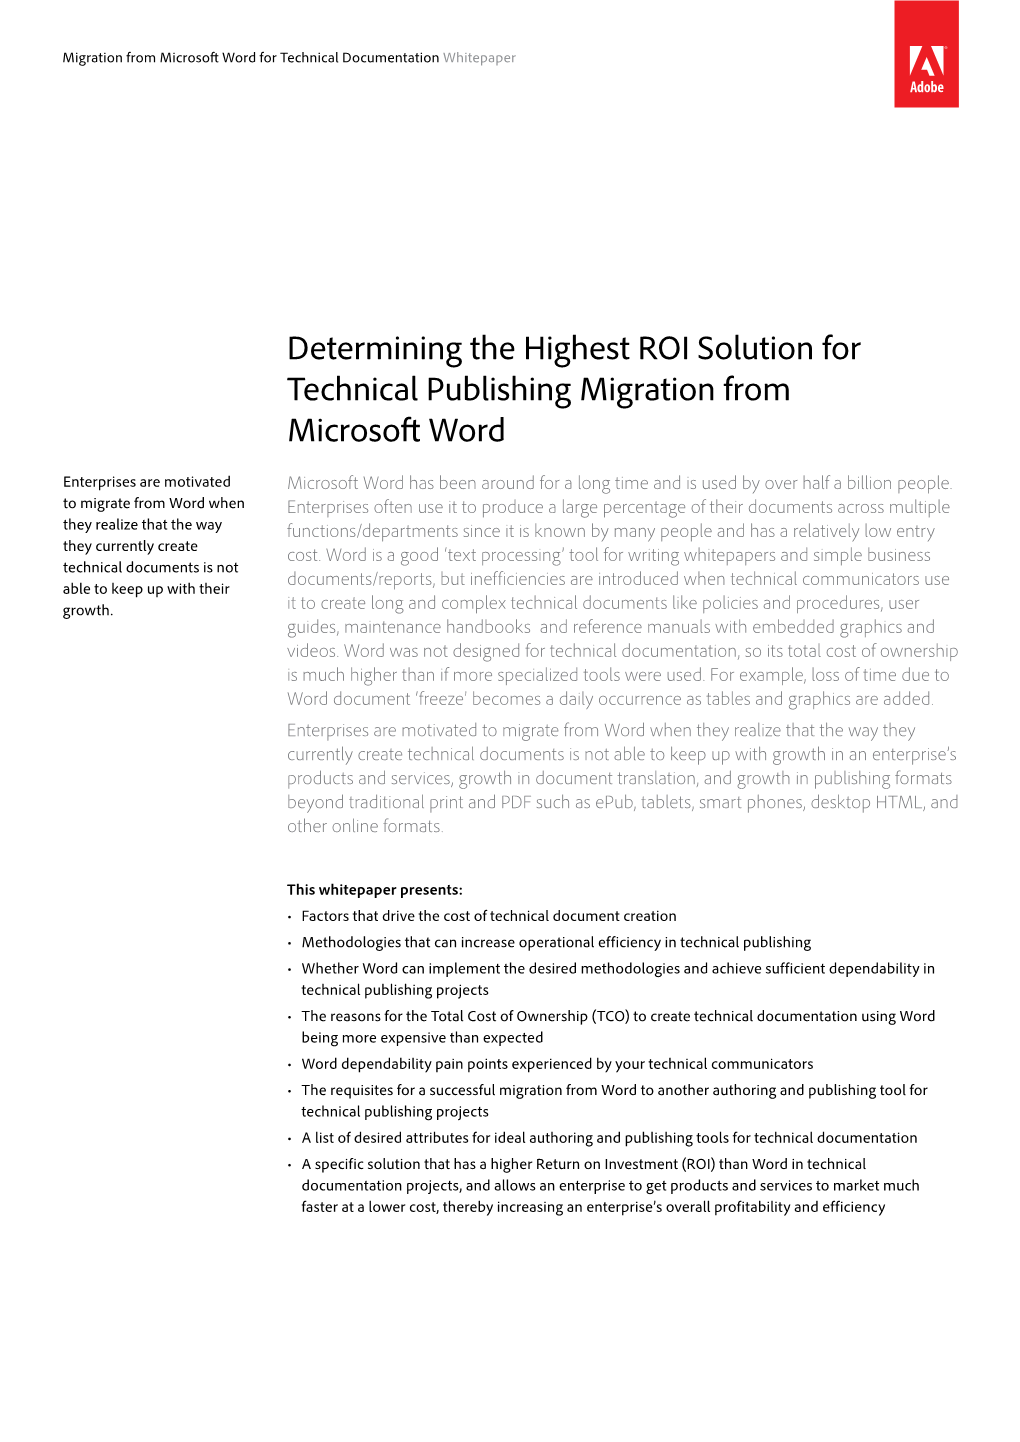 Determining the Highest ROI Solution for Technical Publishing Migration from Microsoft Word